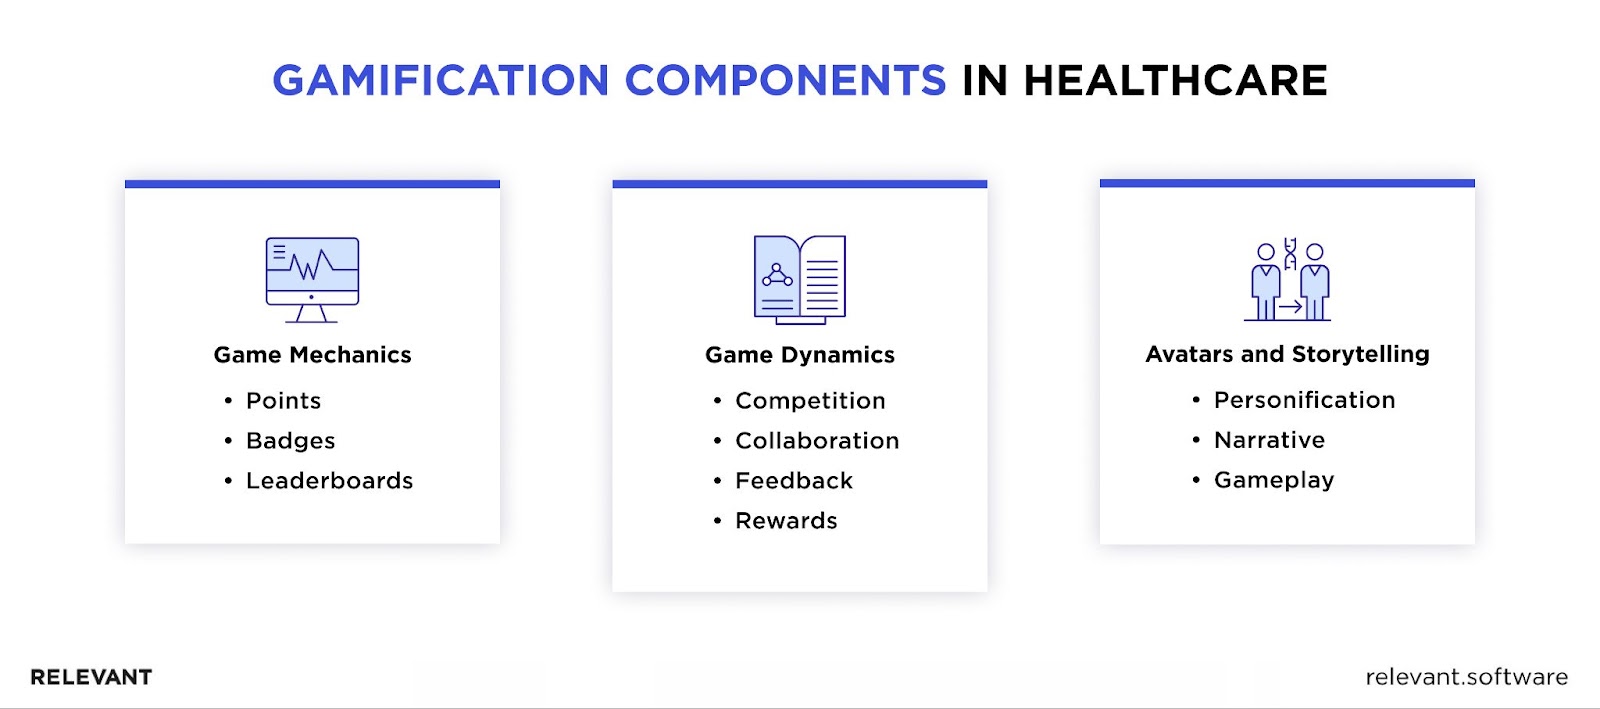 Components of Gamification in Healthcare